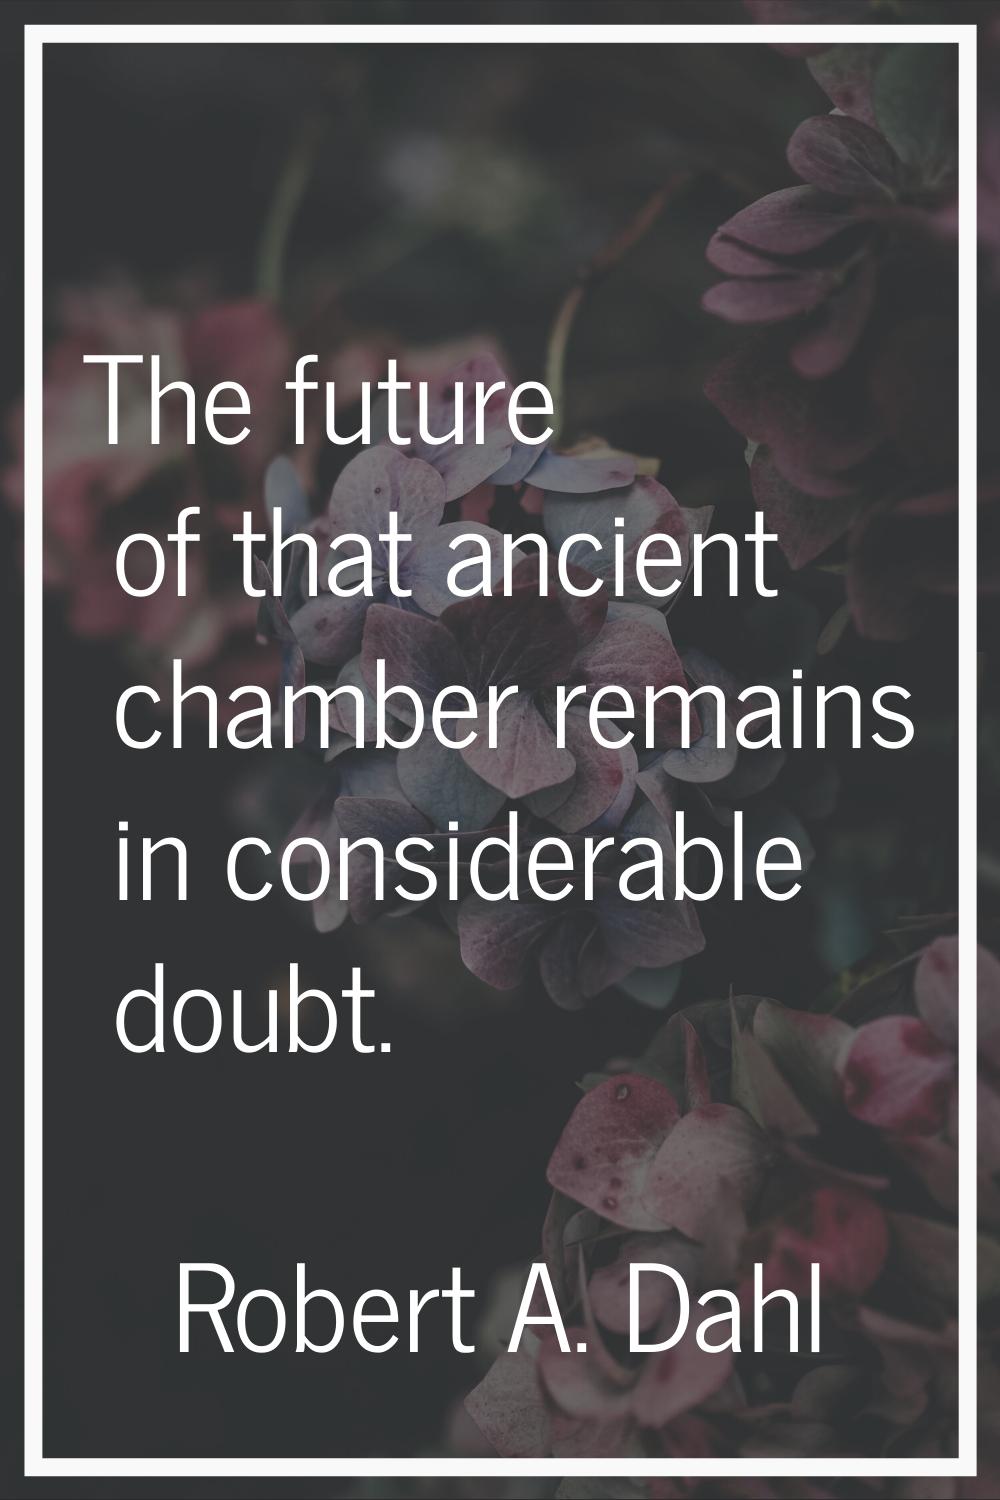 The future of that ancient chamber remains in considerable doubt.